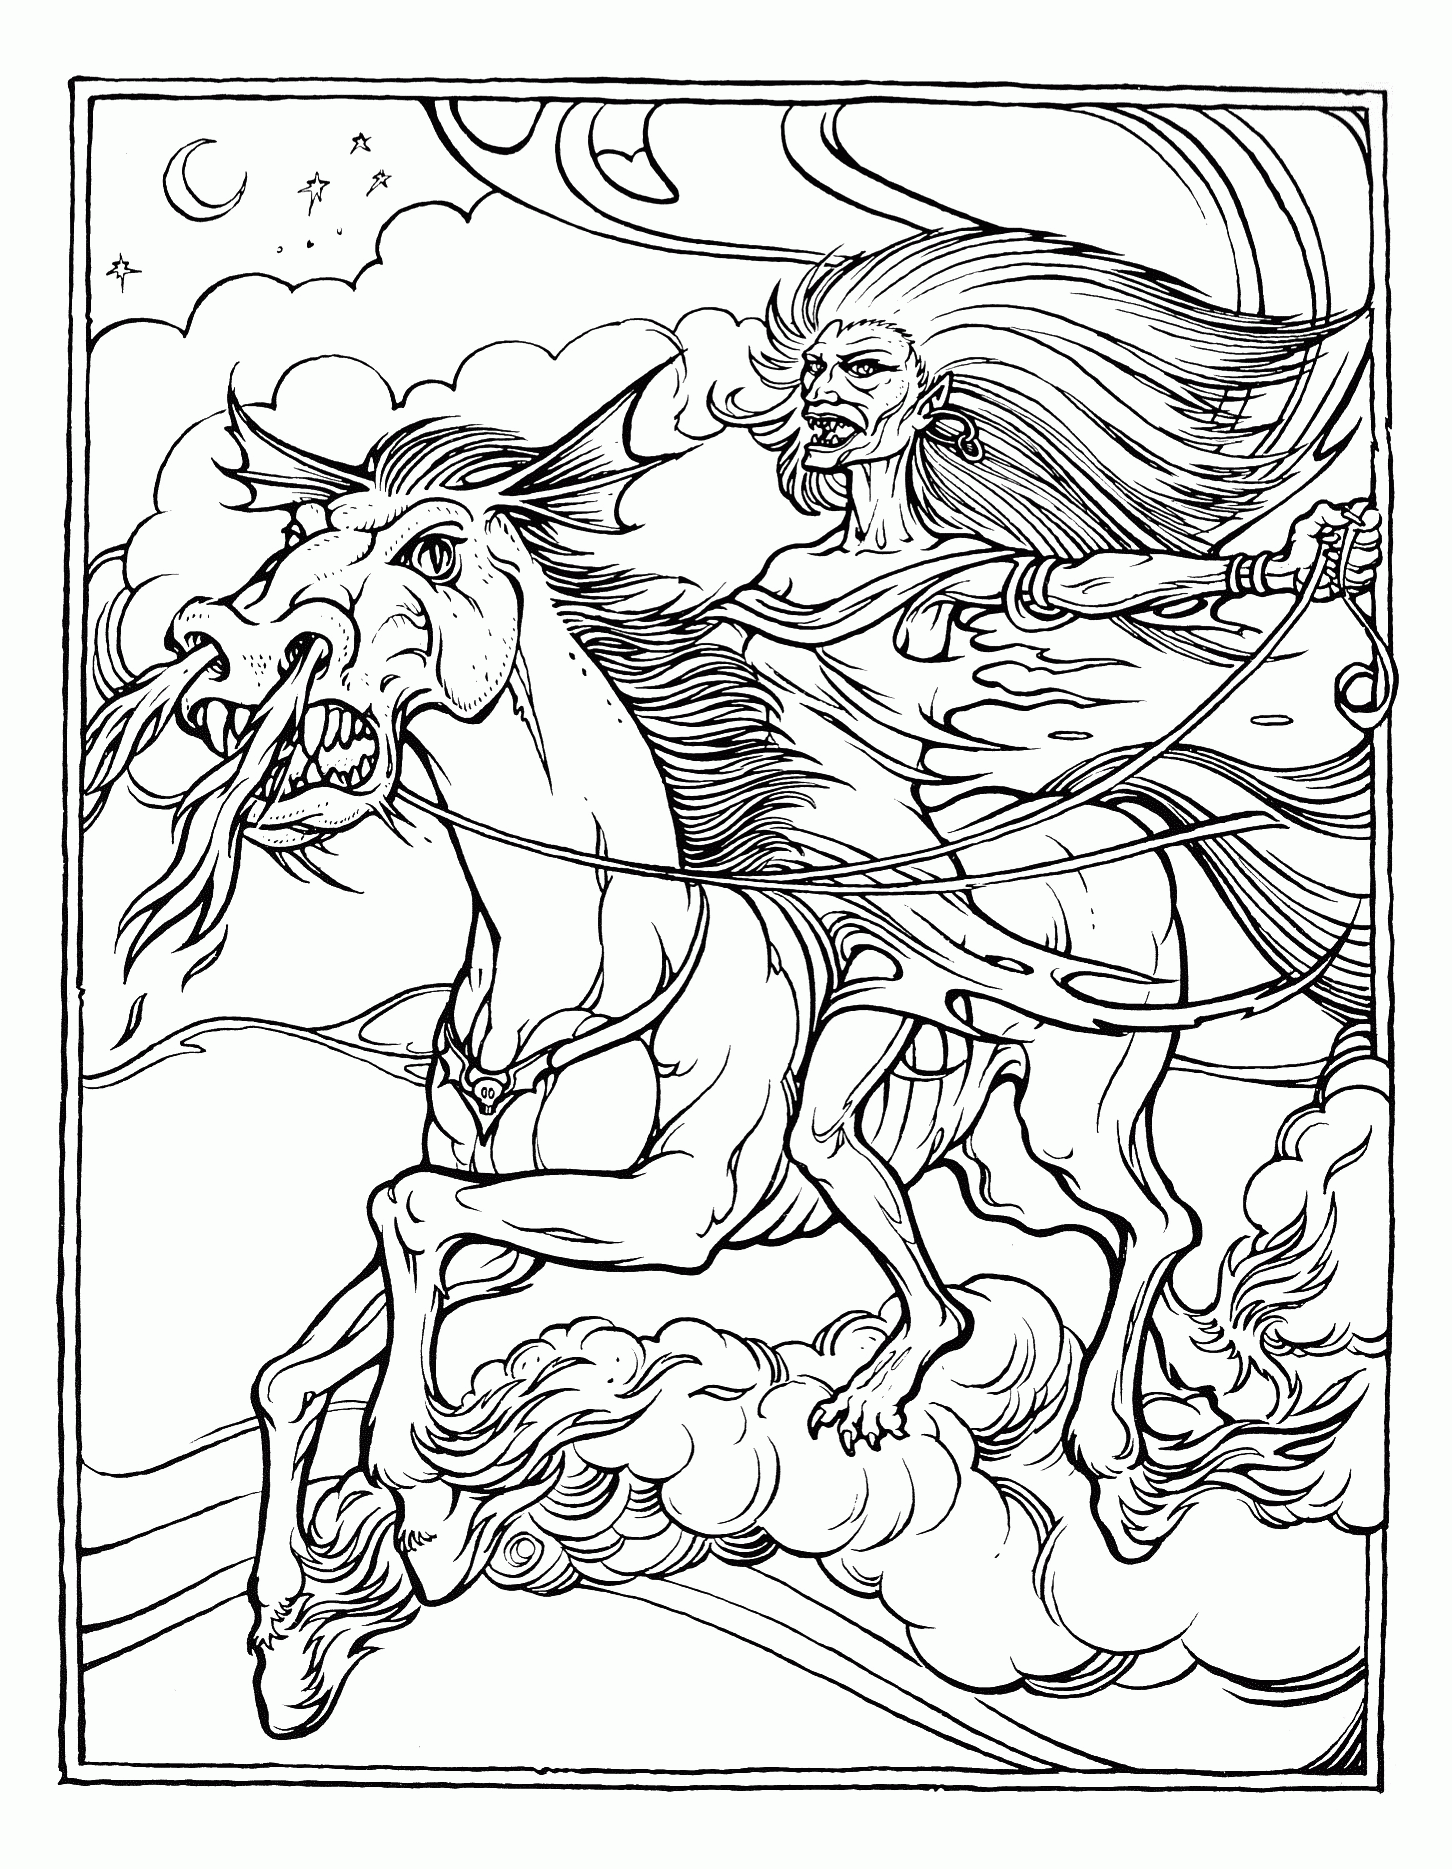 Cool Dragon 13 Coloring Page